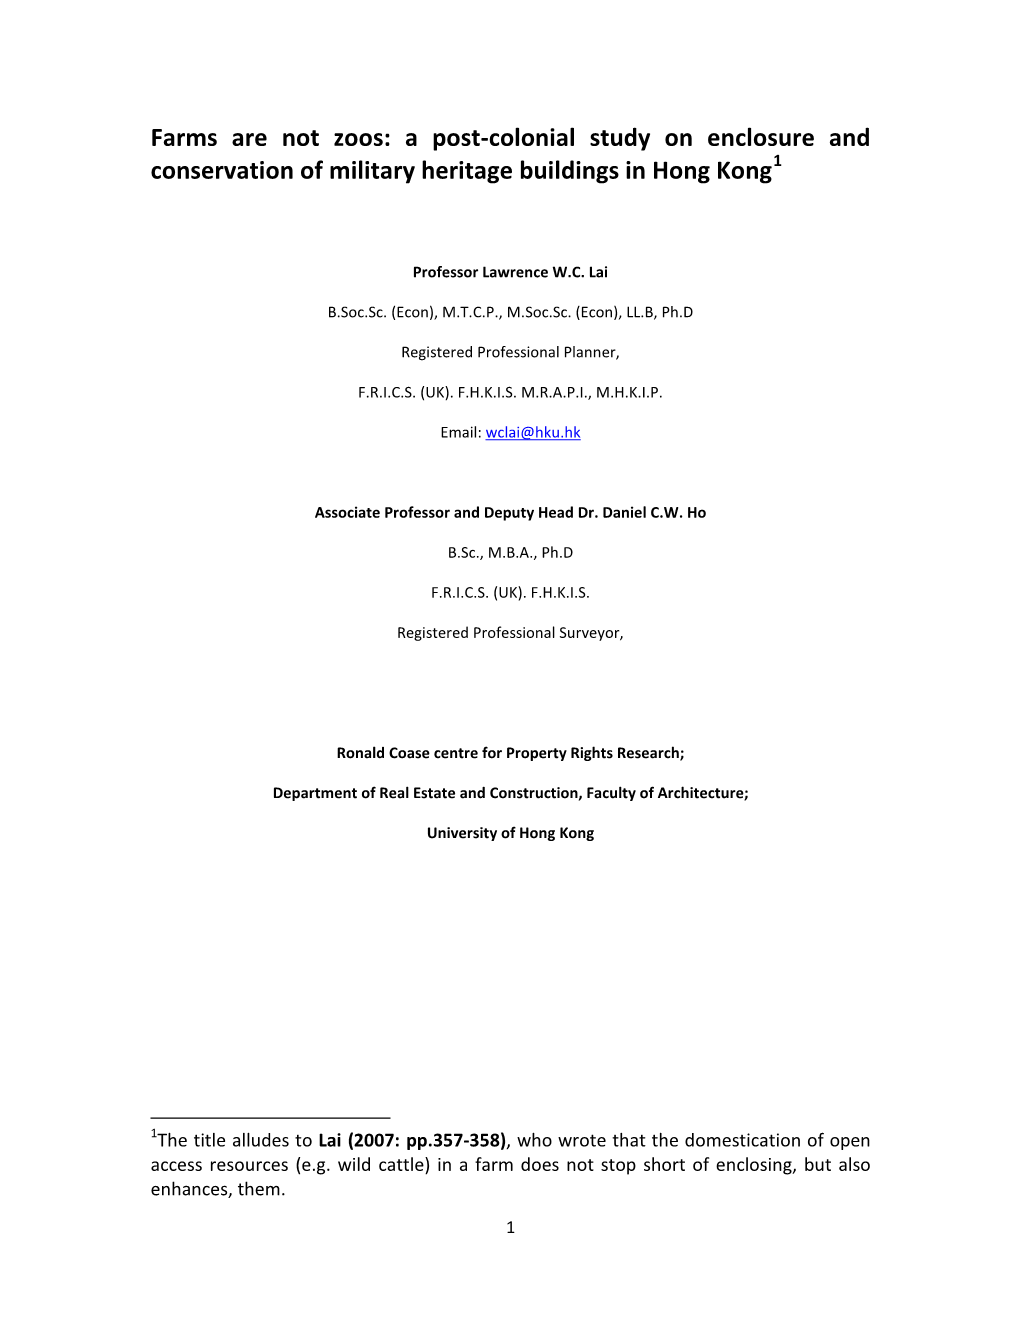 A Post-Colonial Study on Enclosure and Conservation of Military Heritage Buildings in Hong Kong1